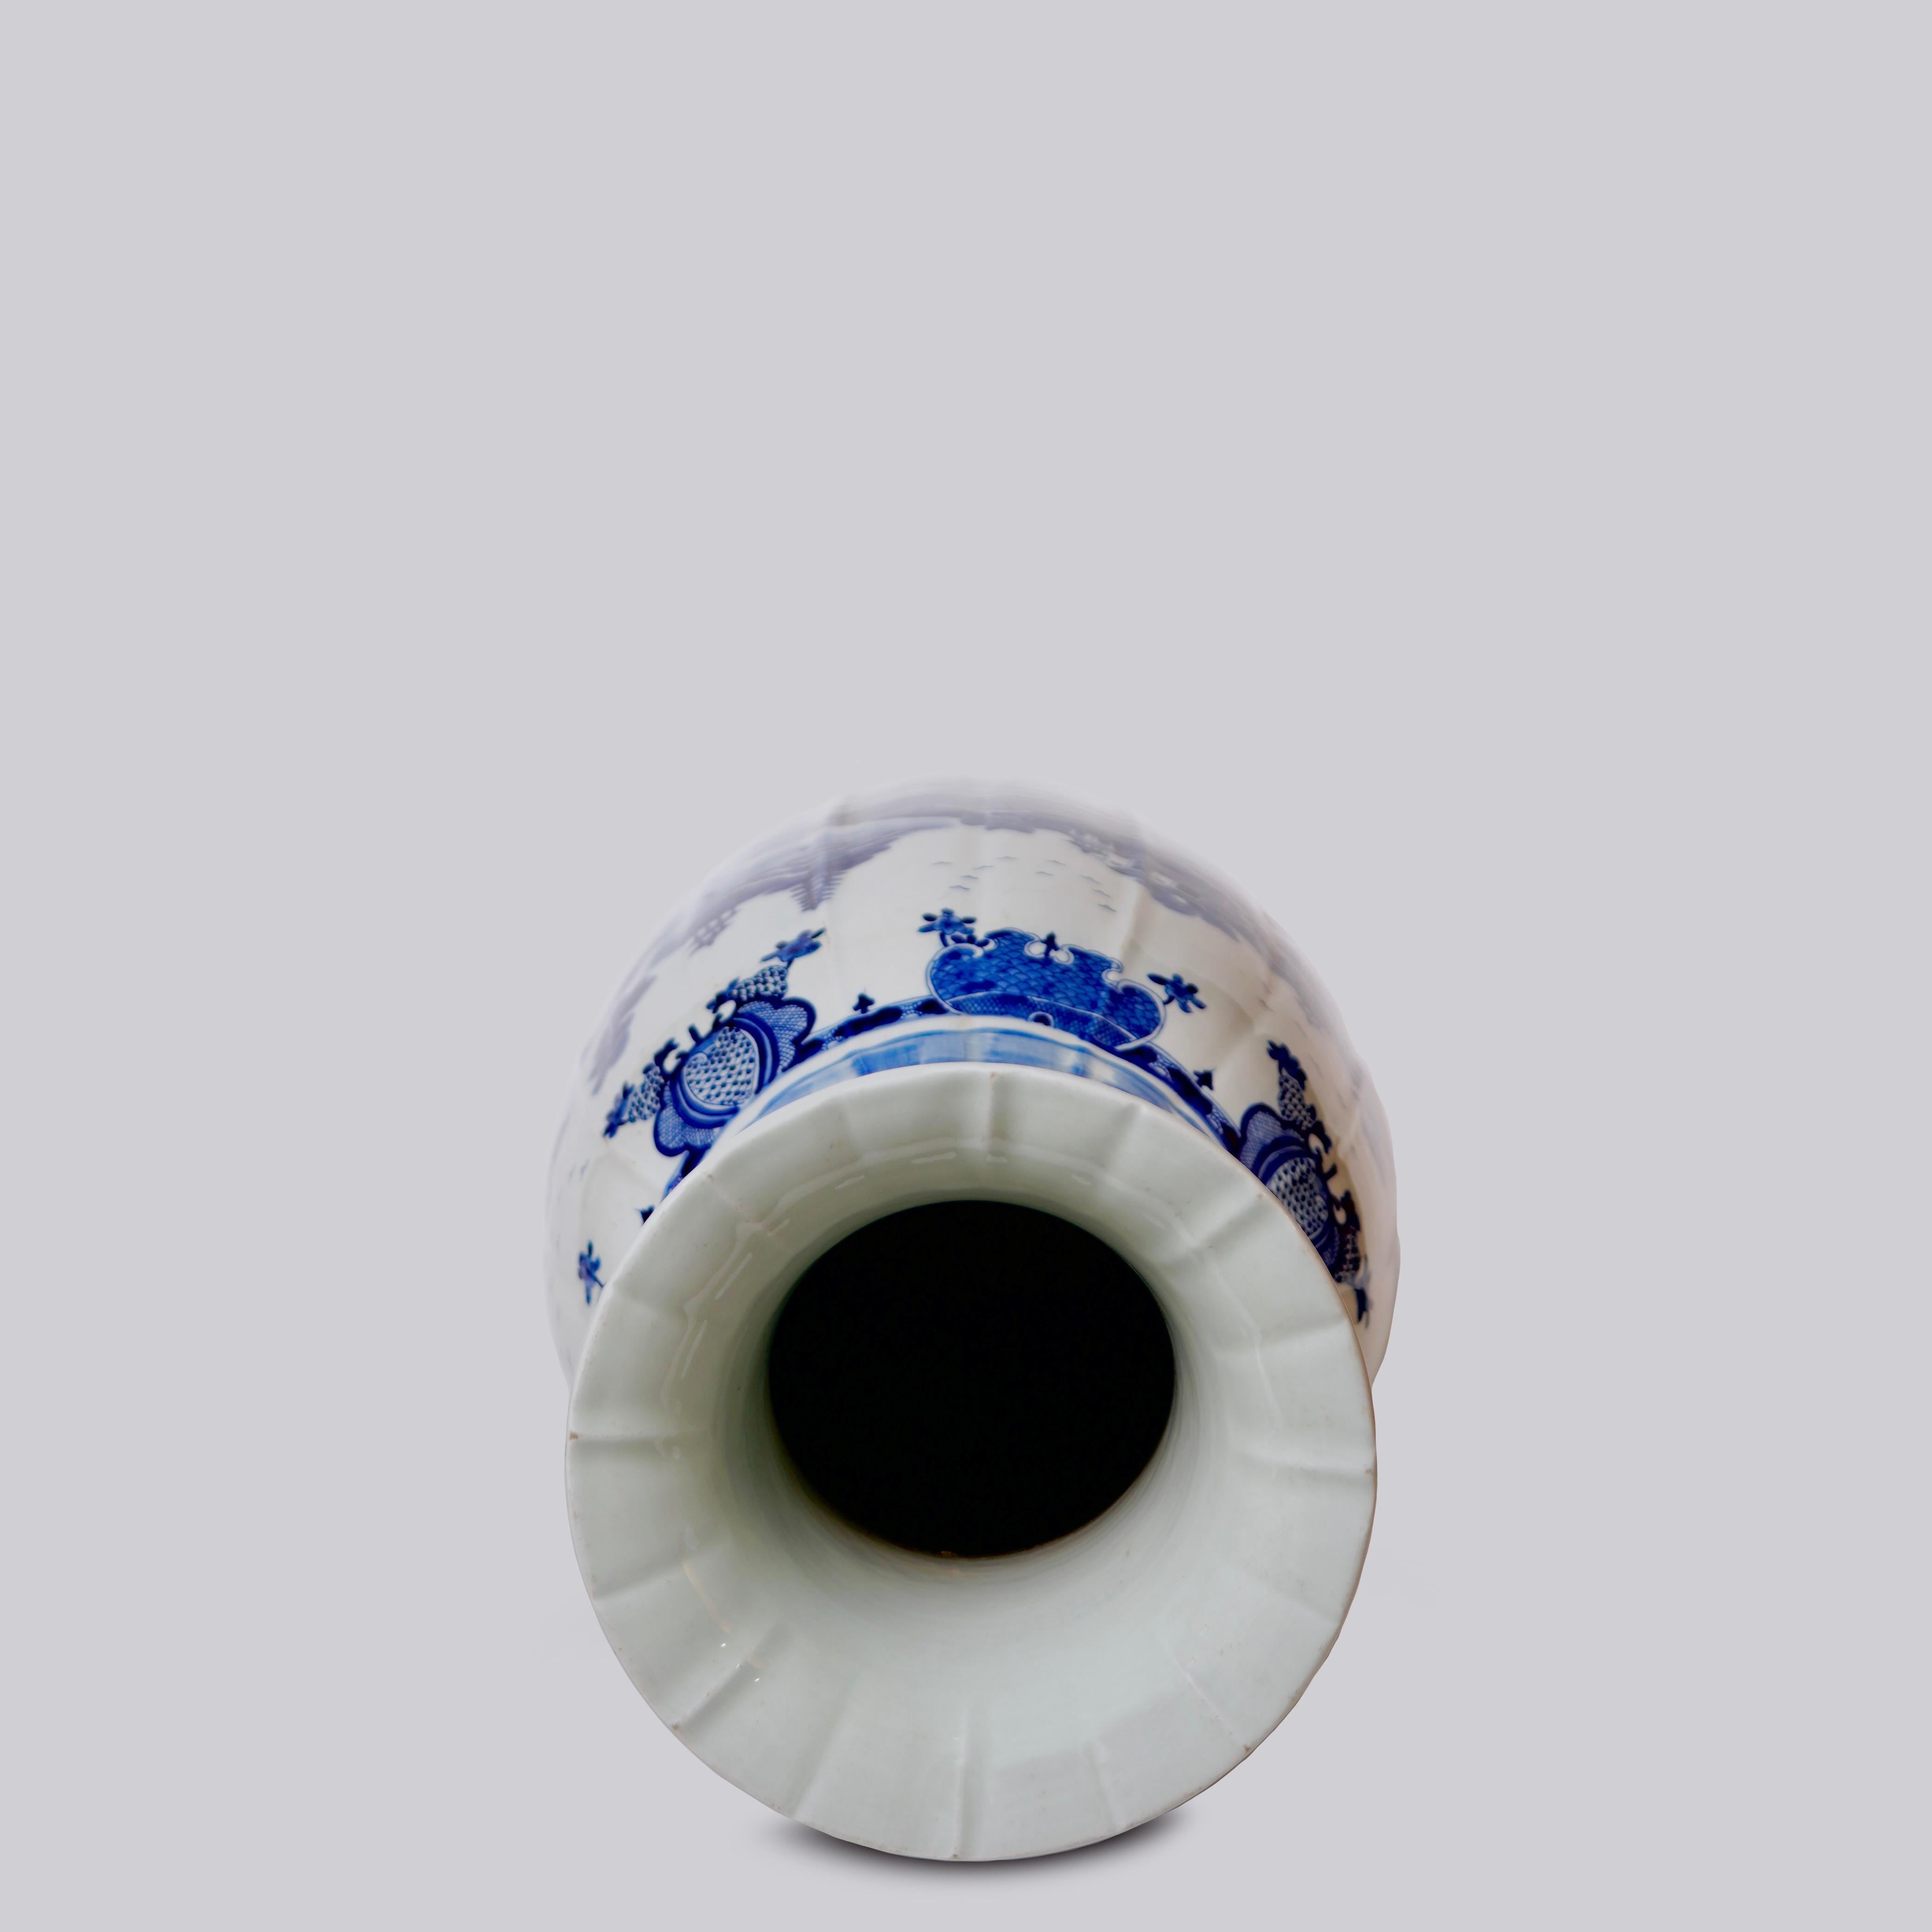 This temple jar is a traditional porcelain vessel from Jingdezhen, a town long distinguished by imperial patronage. This piece is a porcelain vase with a design reminiscent of the famous Willow Ware pattern, accented by gourd-like vertical ribbing